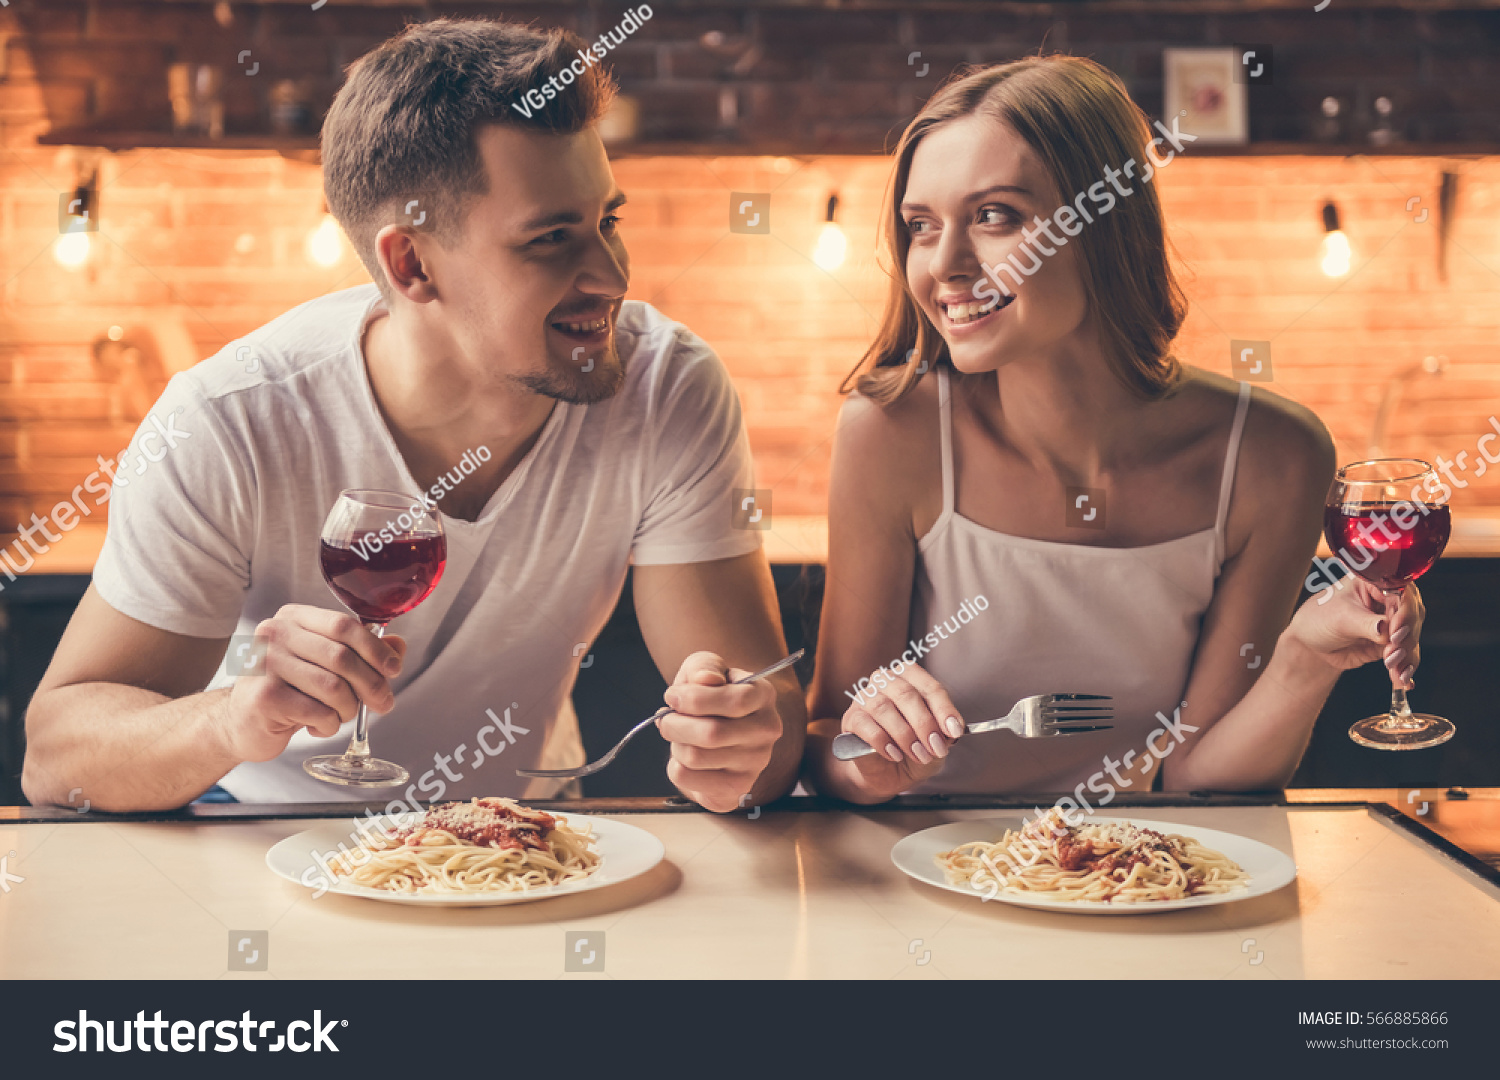 Beautiful couple is talking and smiling while having a romantic dinner together in the kitchen #566885866